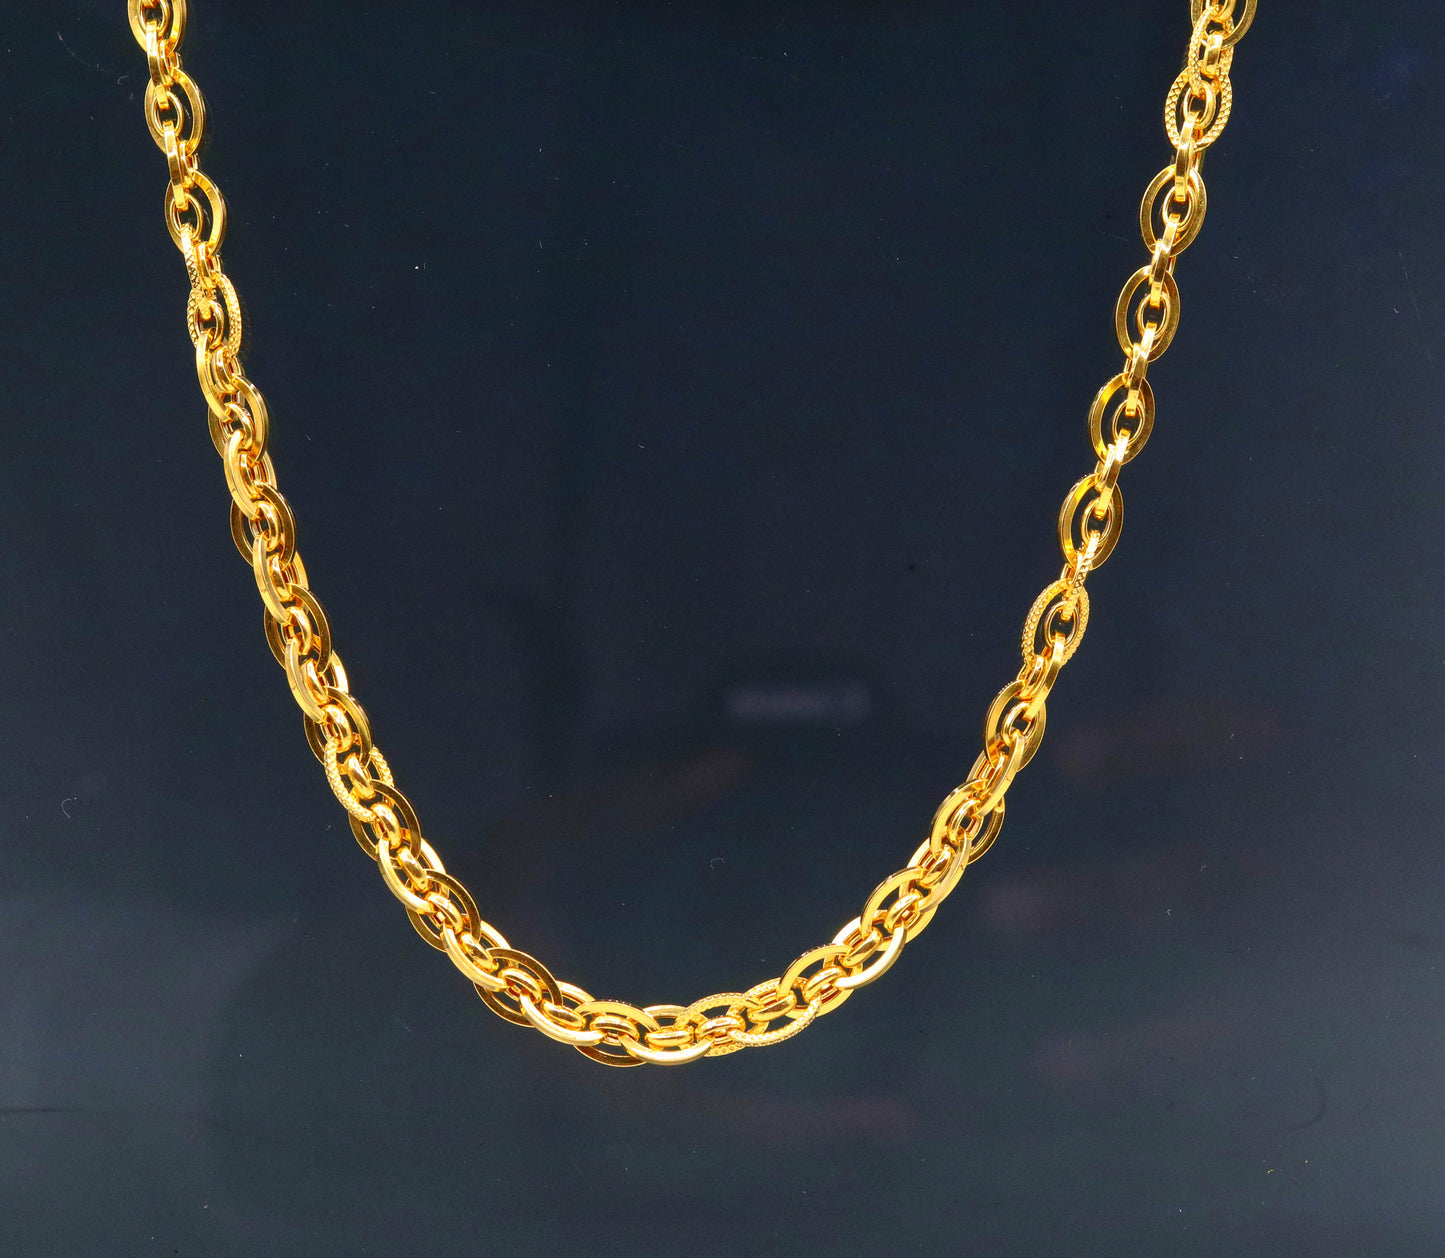 Handmade 22kt yellow gold amazing excellent design chain necklace handcrafted indian jewelry gifting ideas ch213 - TRIBAL ORNAMENTS